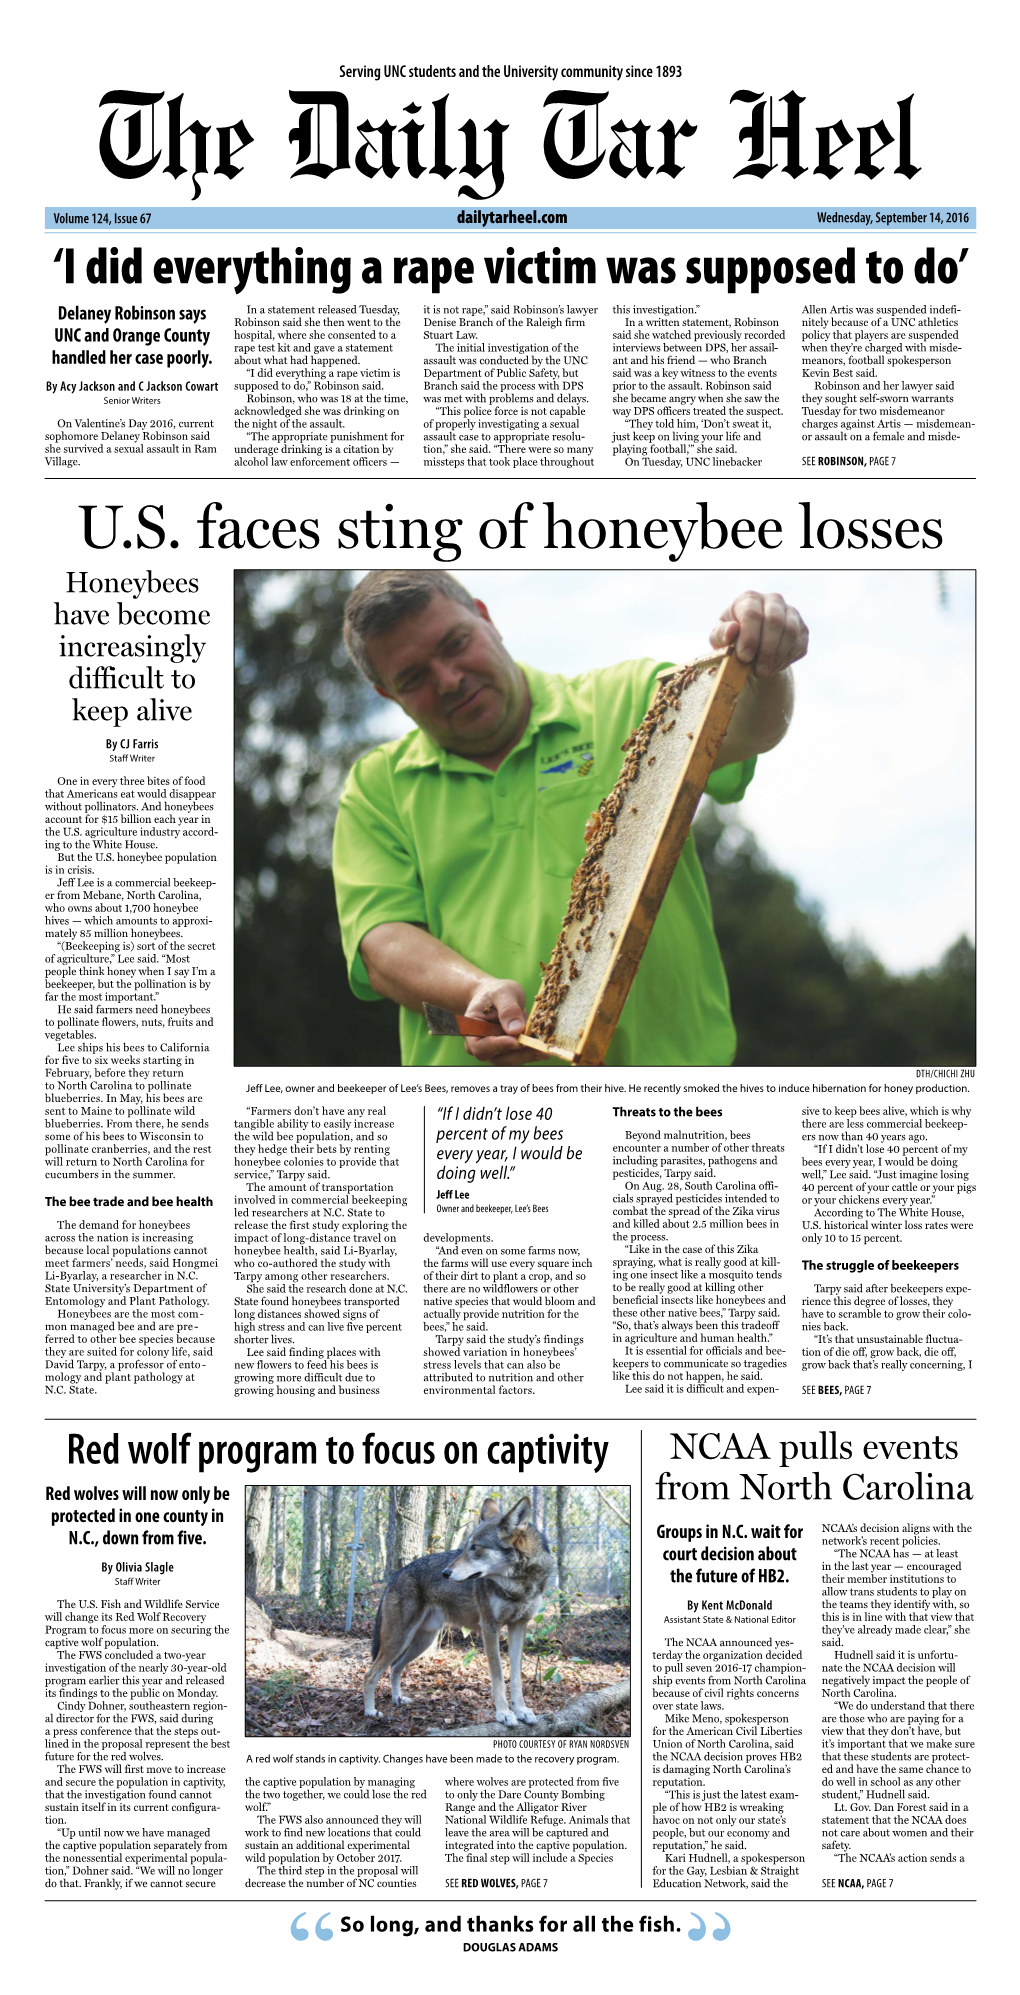 U.S. Faces Sting of Honeybee Losses Honeybees Have Become Increasingly Difficult to Keep Alive by CJ Farris Staff Writer